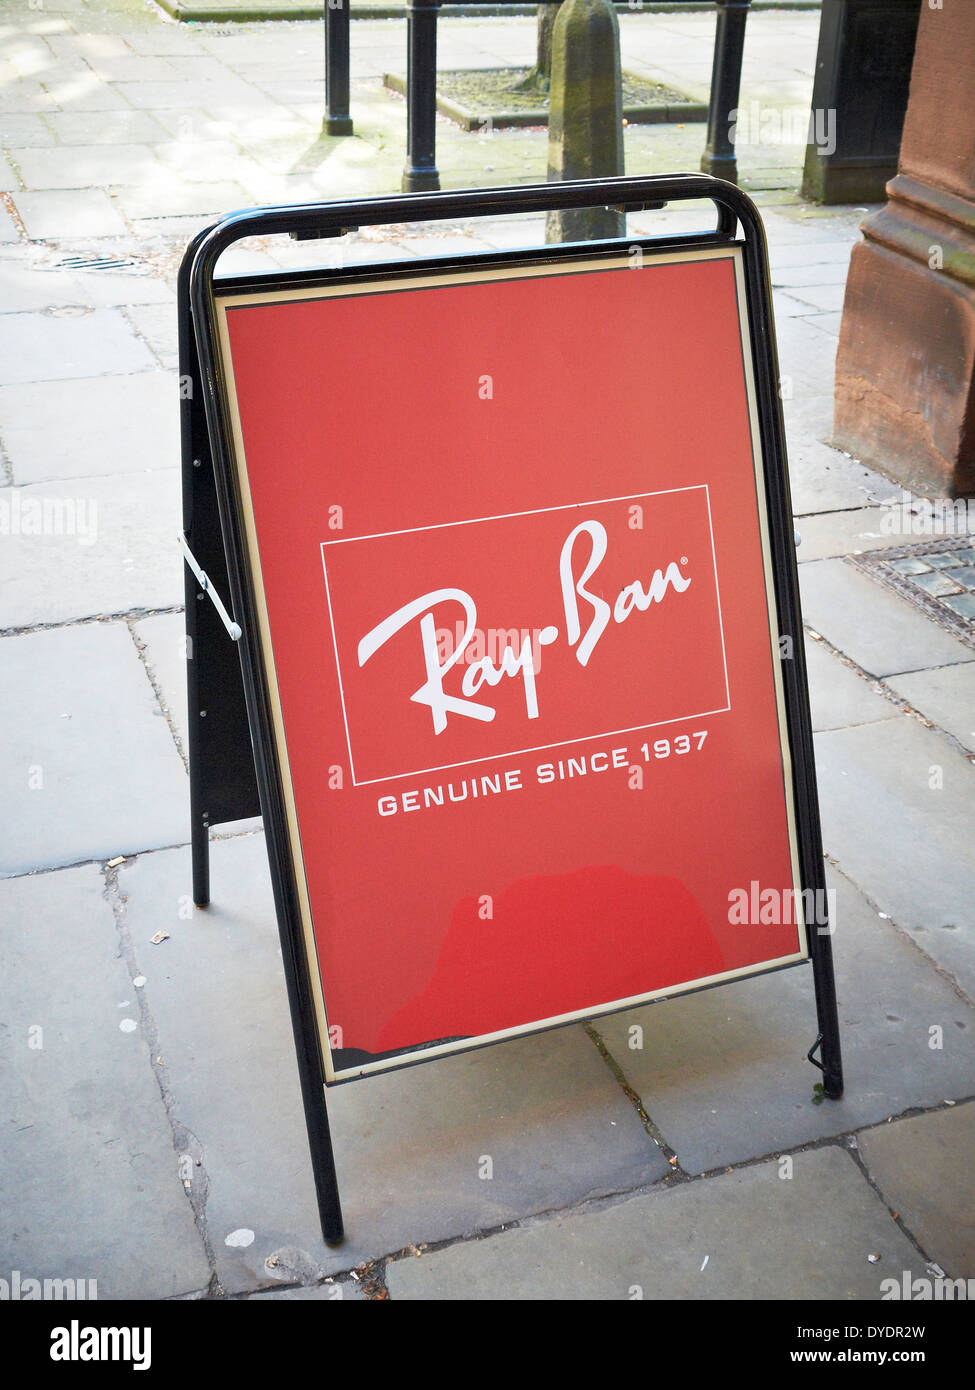 Ray Ban sun glasses advert on pavement in Manchester UK Stock Photo